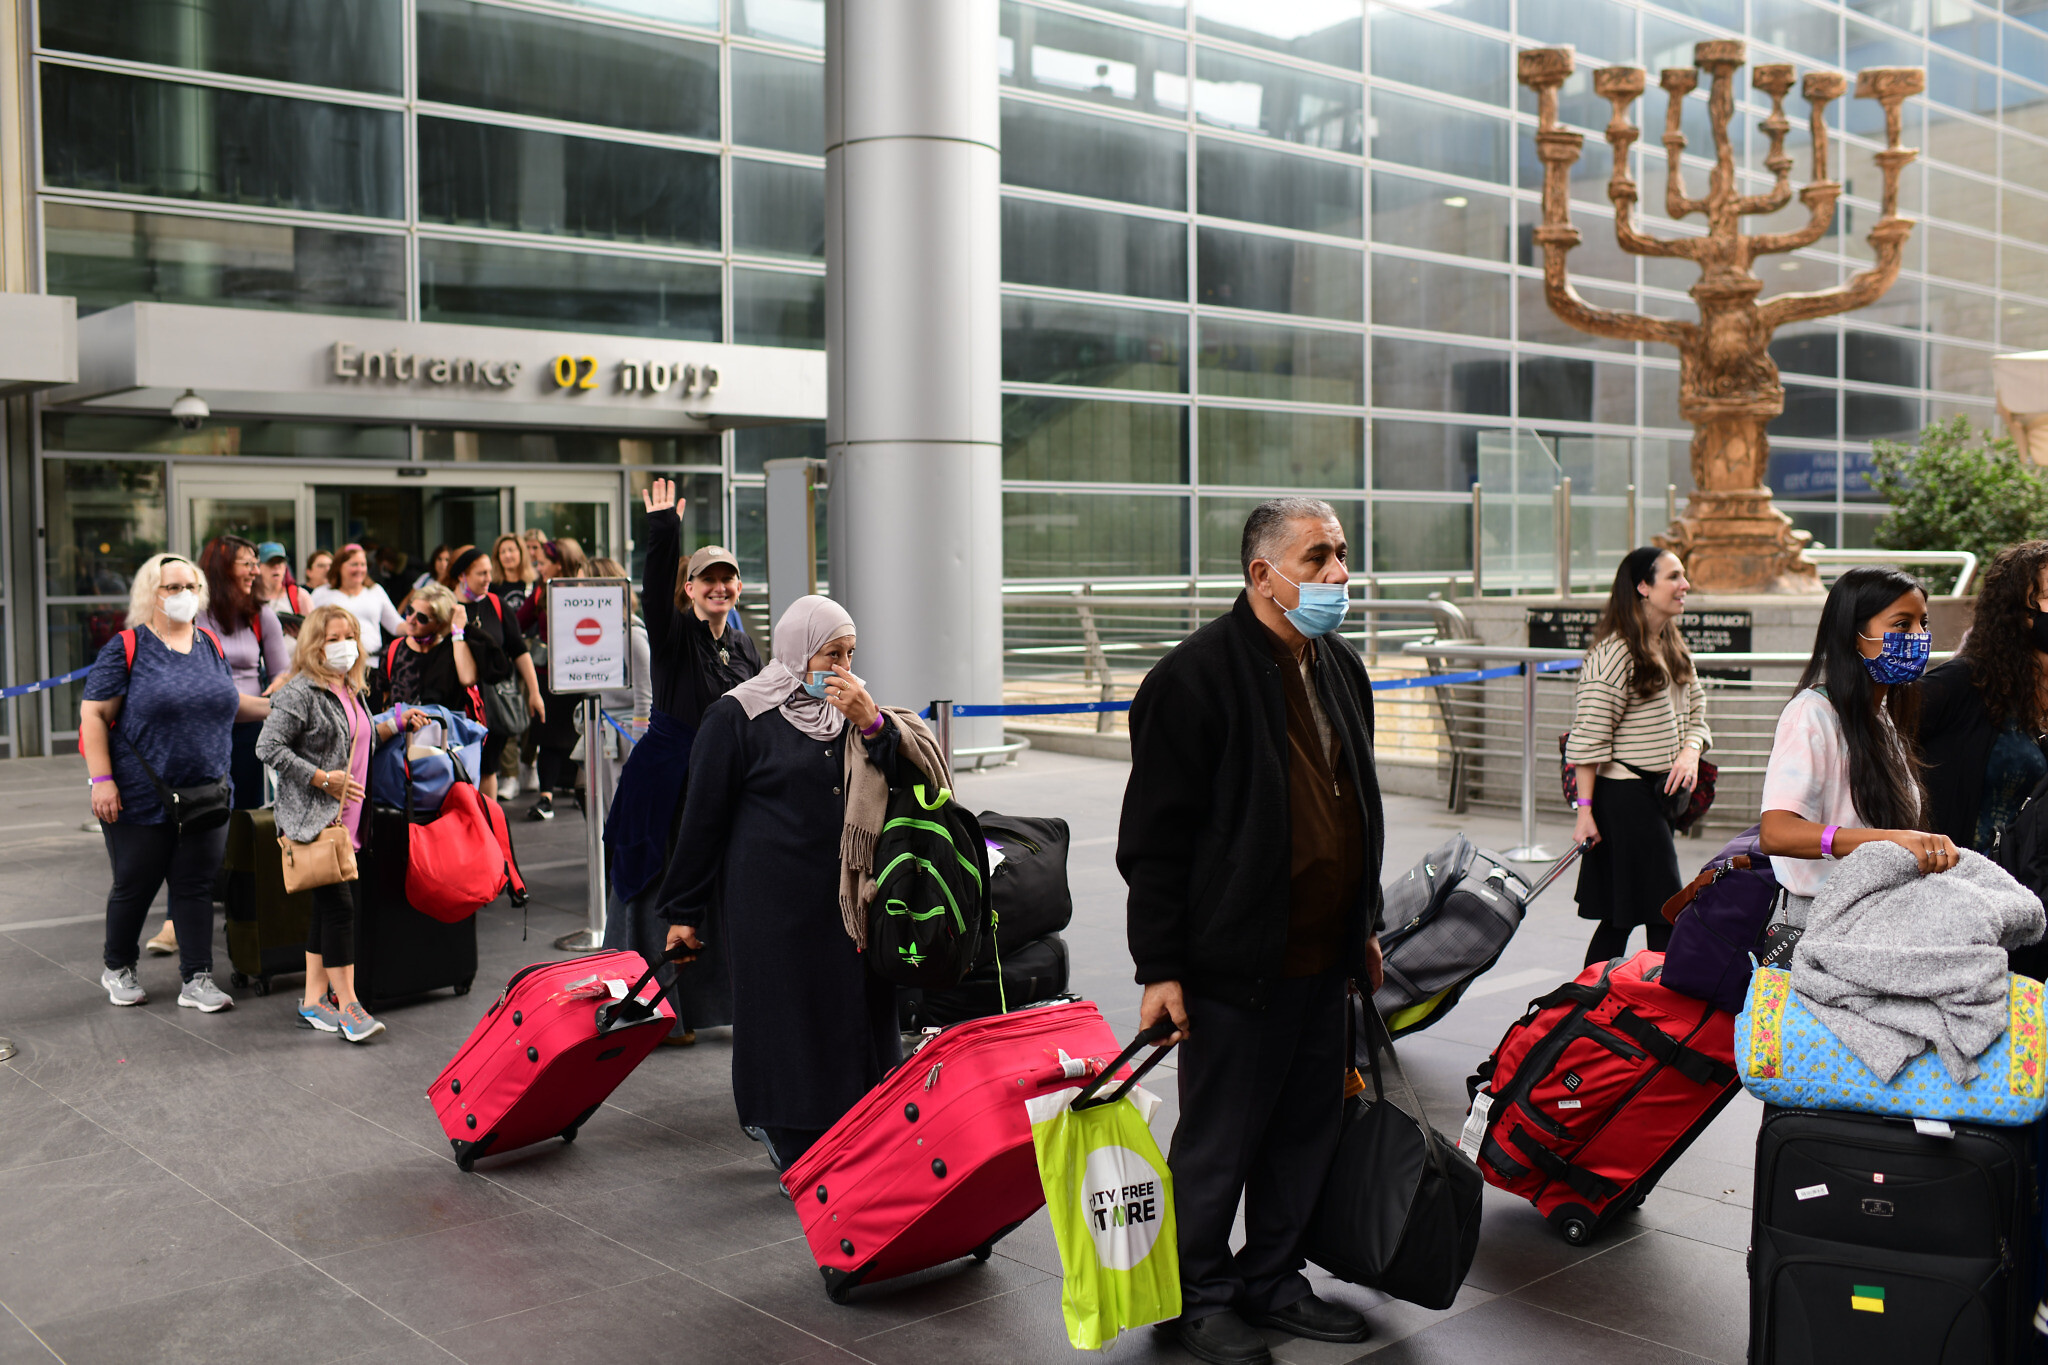 Travelers seen exiting Ben Gurion International Airport, as Israel opens its borders and allows tourists to enter the country after months of being shut due to the COVID-19 pandemic, November 1, 2021. (Tomer Neuberg/FLASH90